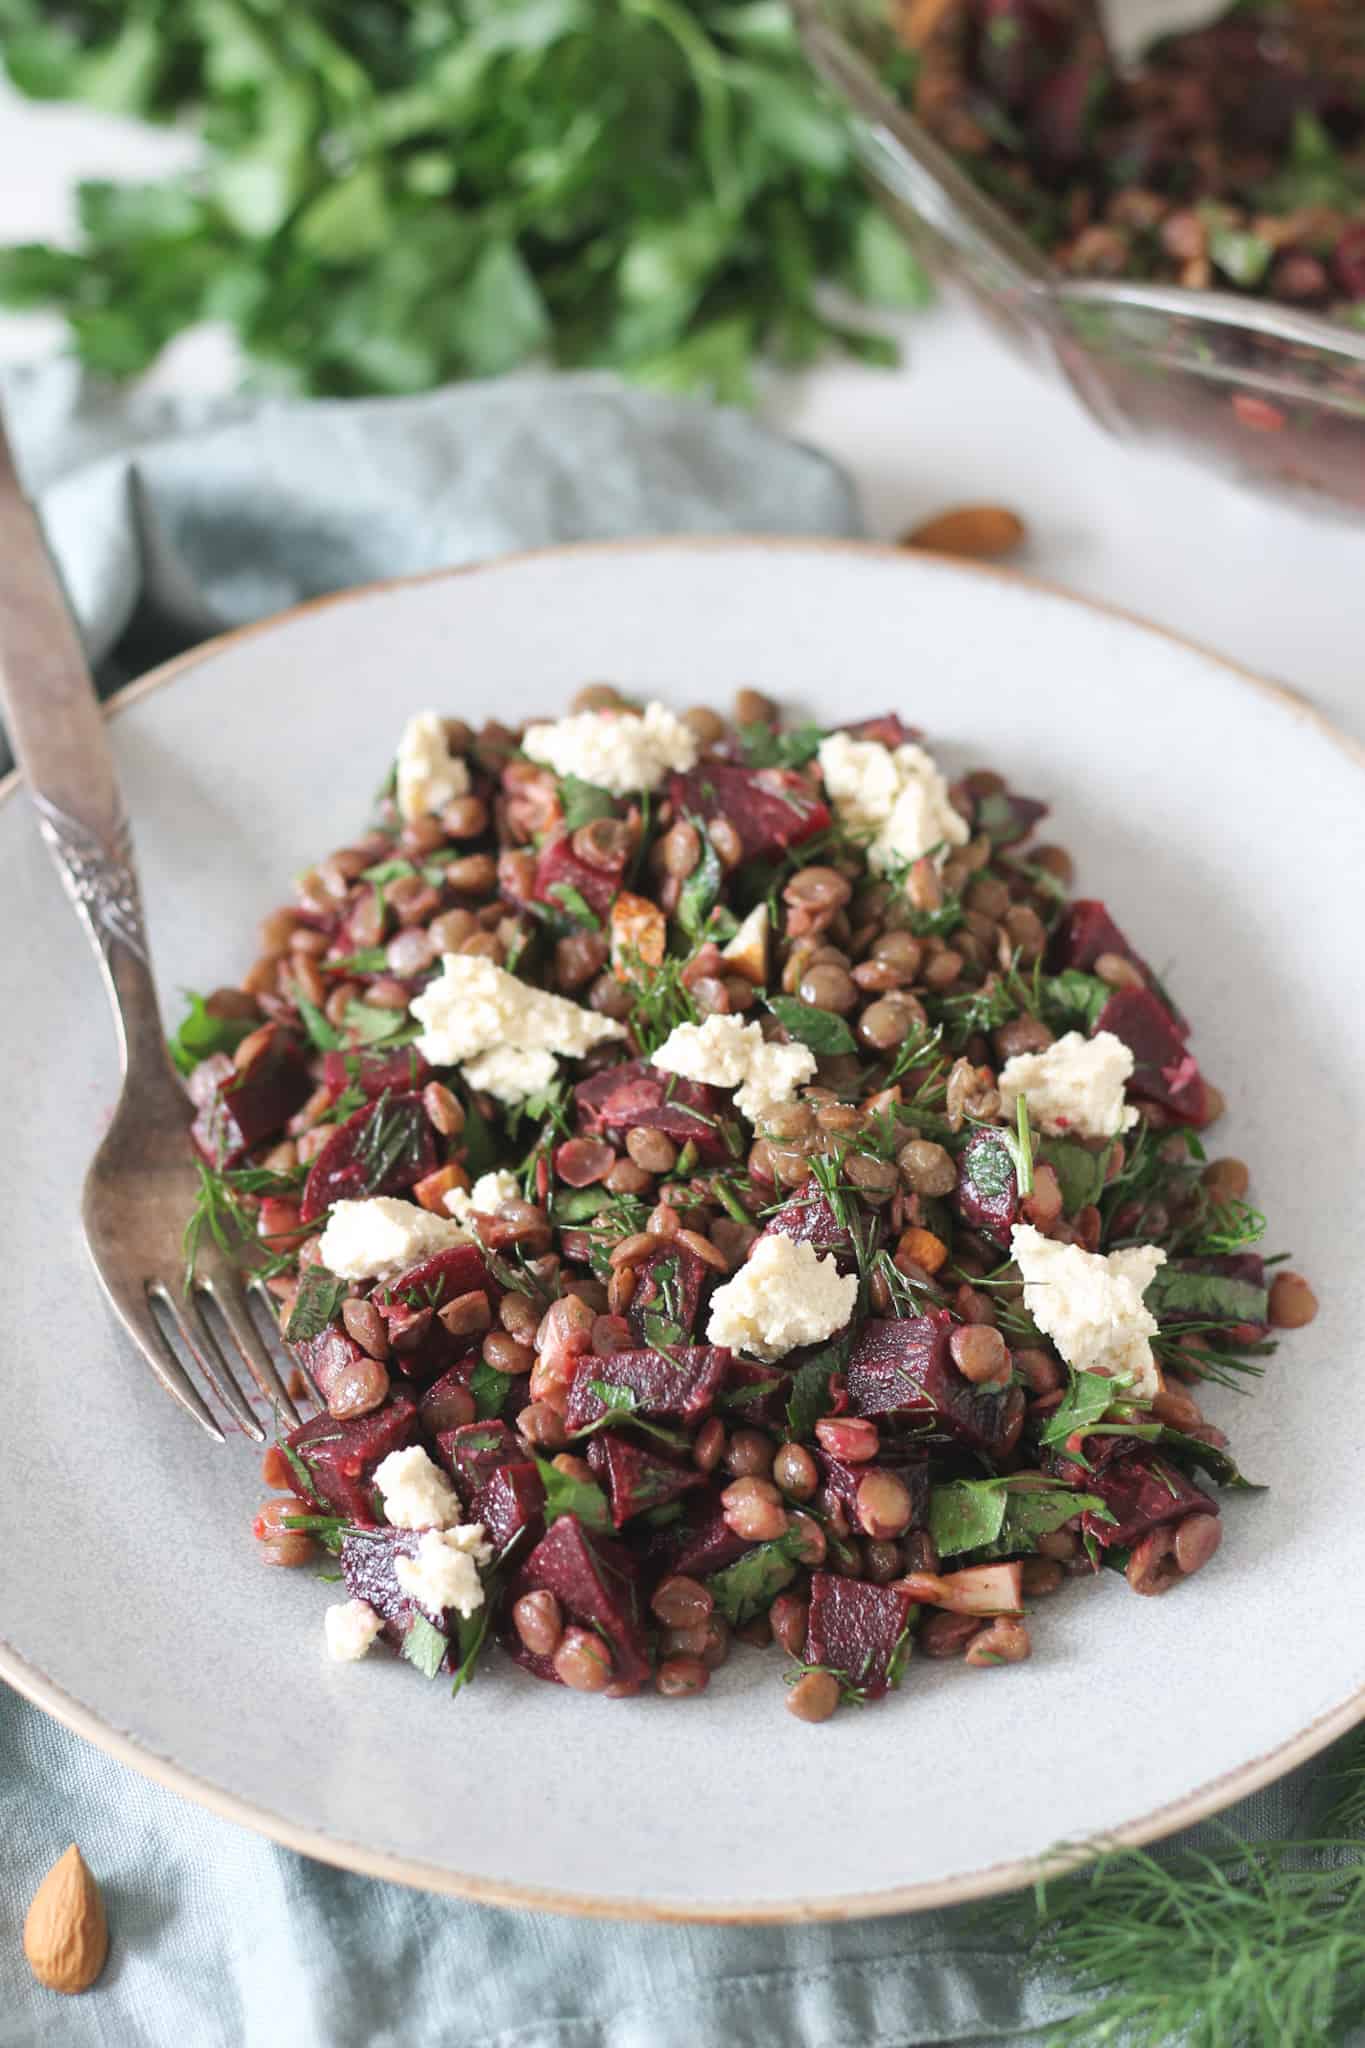 Lentil and beetroot salad with tofu feta and fresh herbs in a blue plate